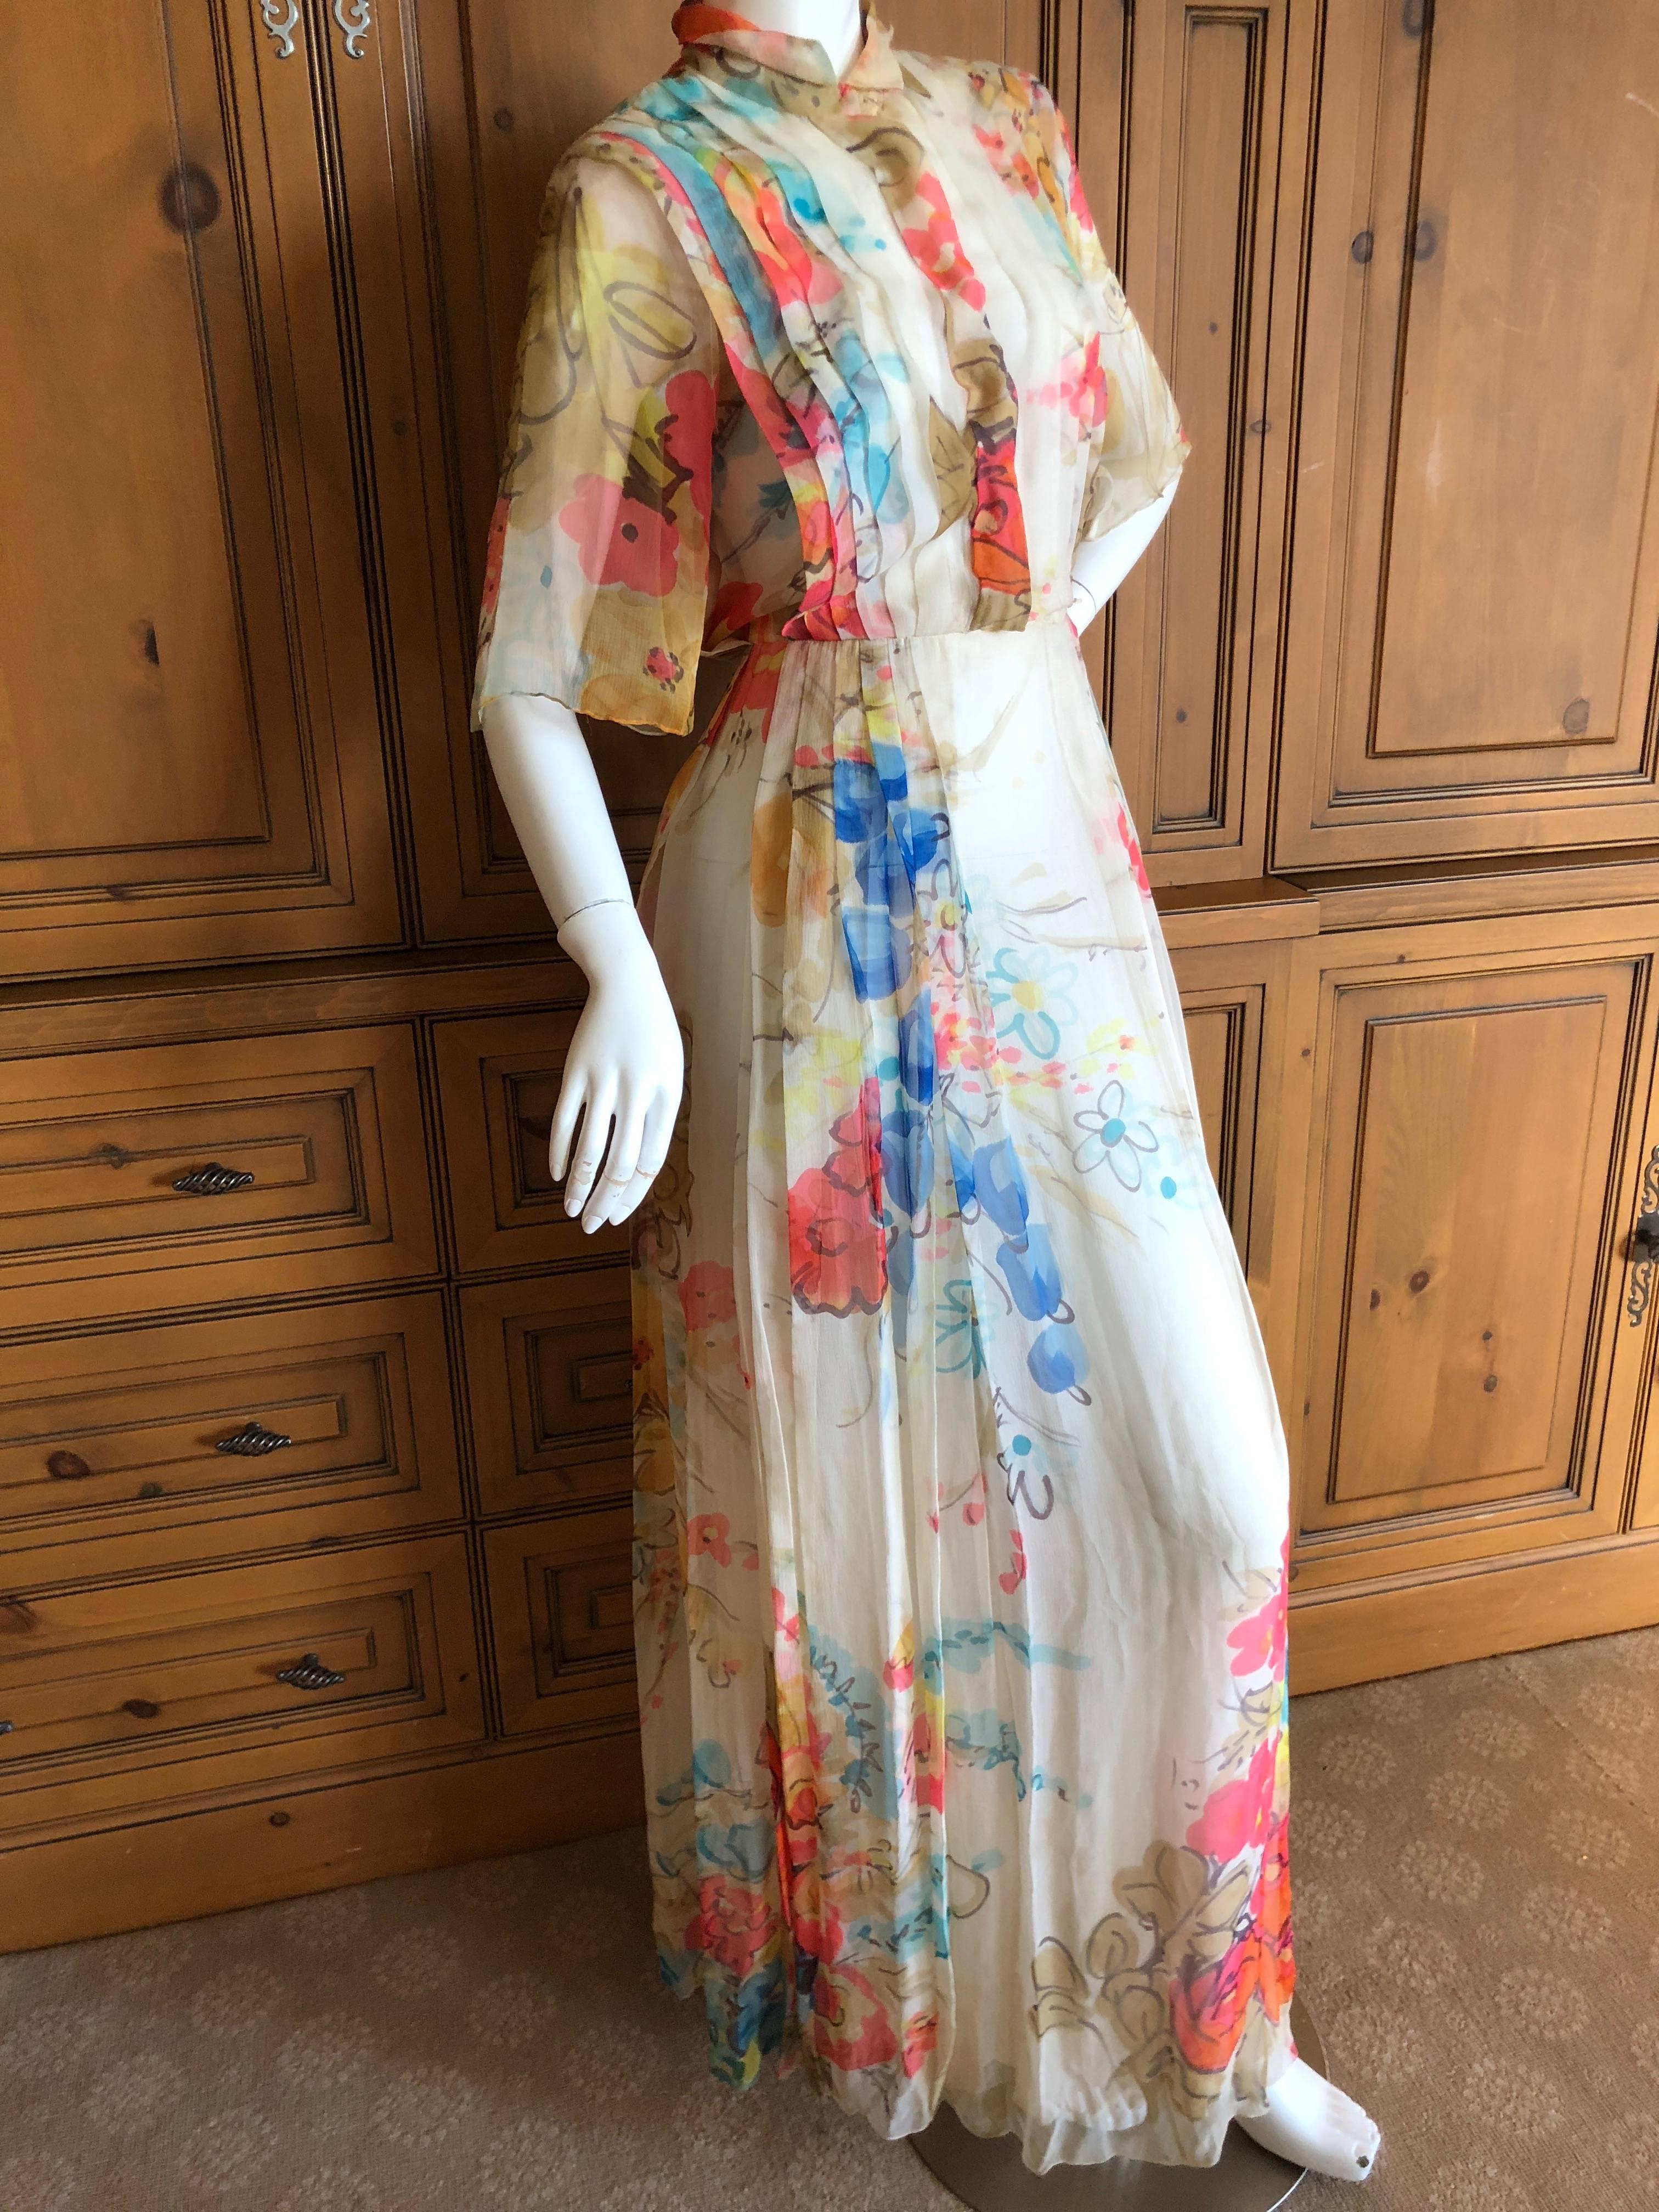 Cardinali Elegant Pleated Ivory Floral Silk Short Sleeve Evening Dress  In Good Condition For Sale In Cloverdale, CA